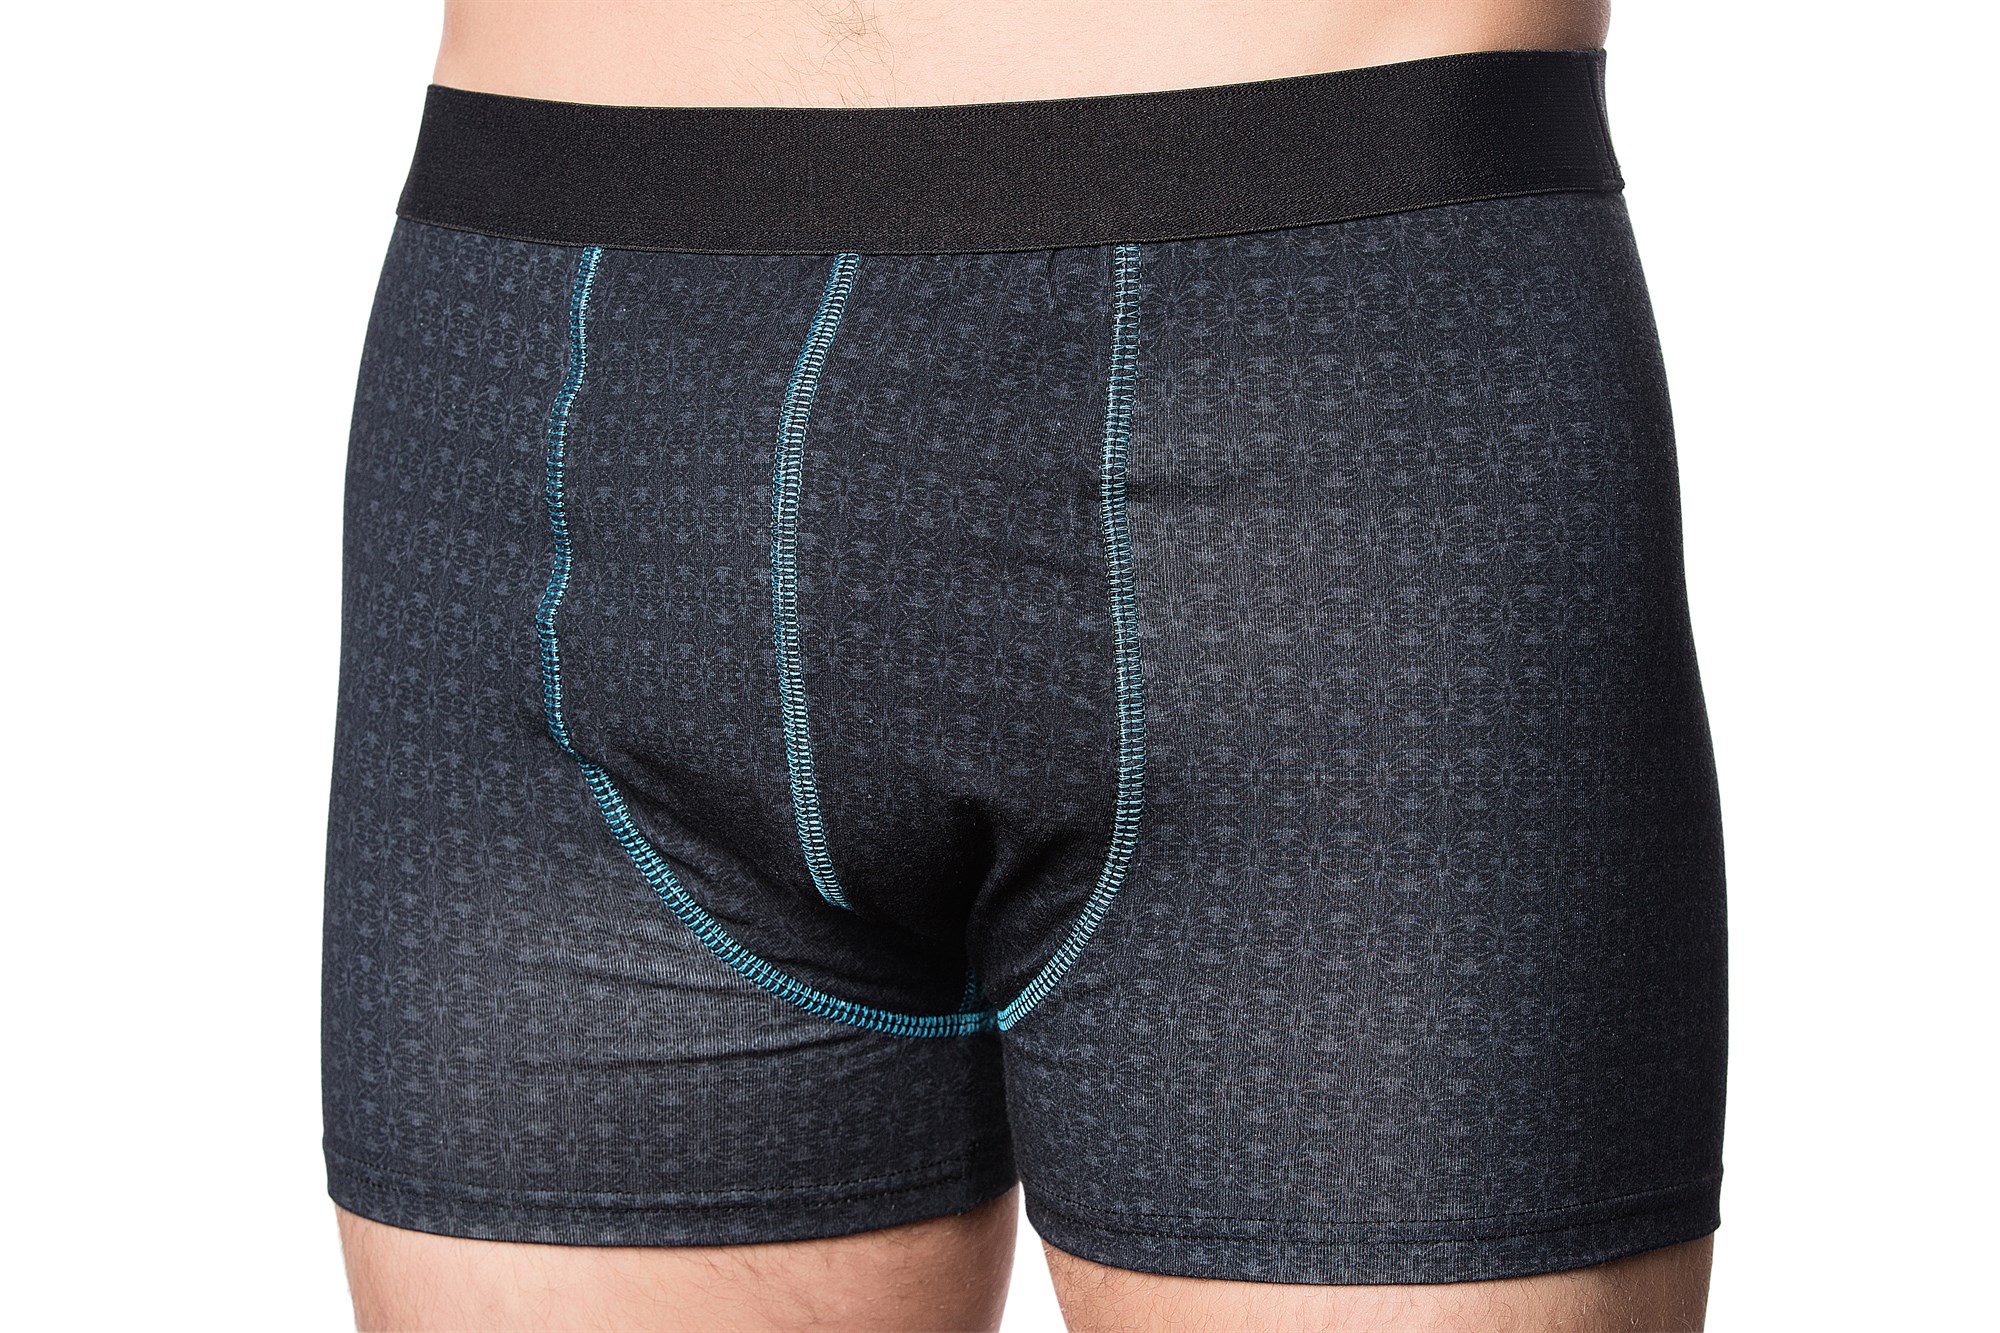 Incontinence pants for men. Light incontinence.See here.